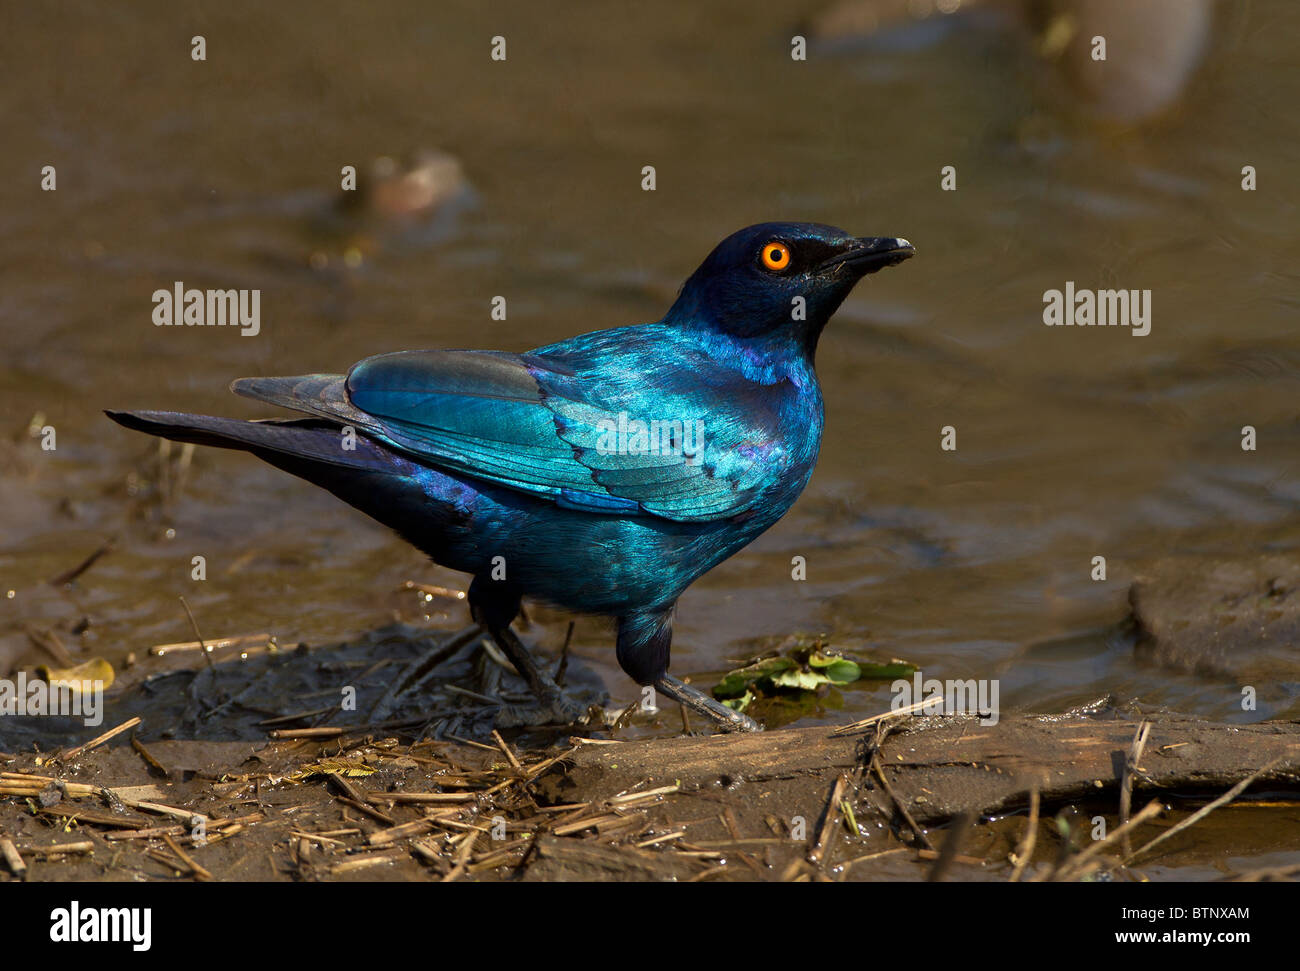 Cape Glossy starling at water. Stock Photo